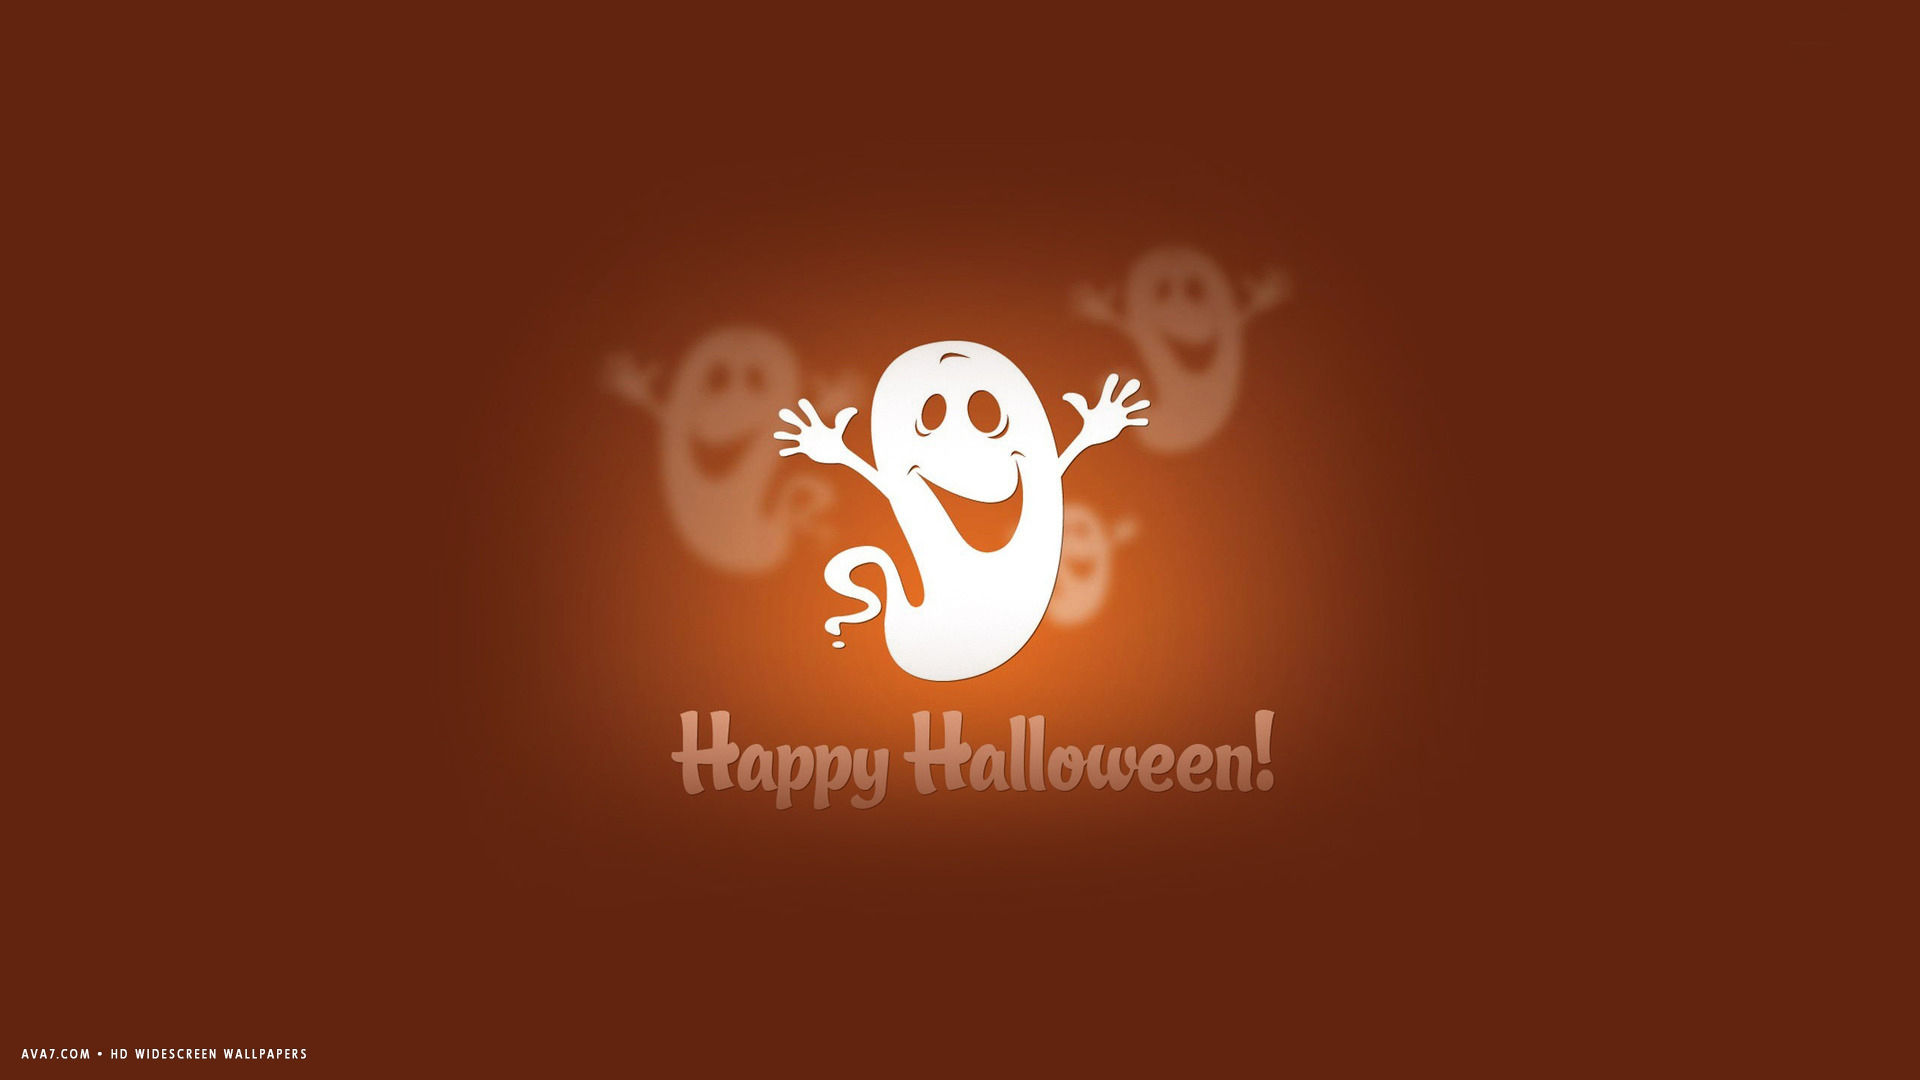 Happy Halloween Funny Ghosts Simple Holiday HD Widescreen